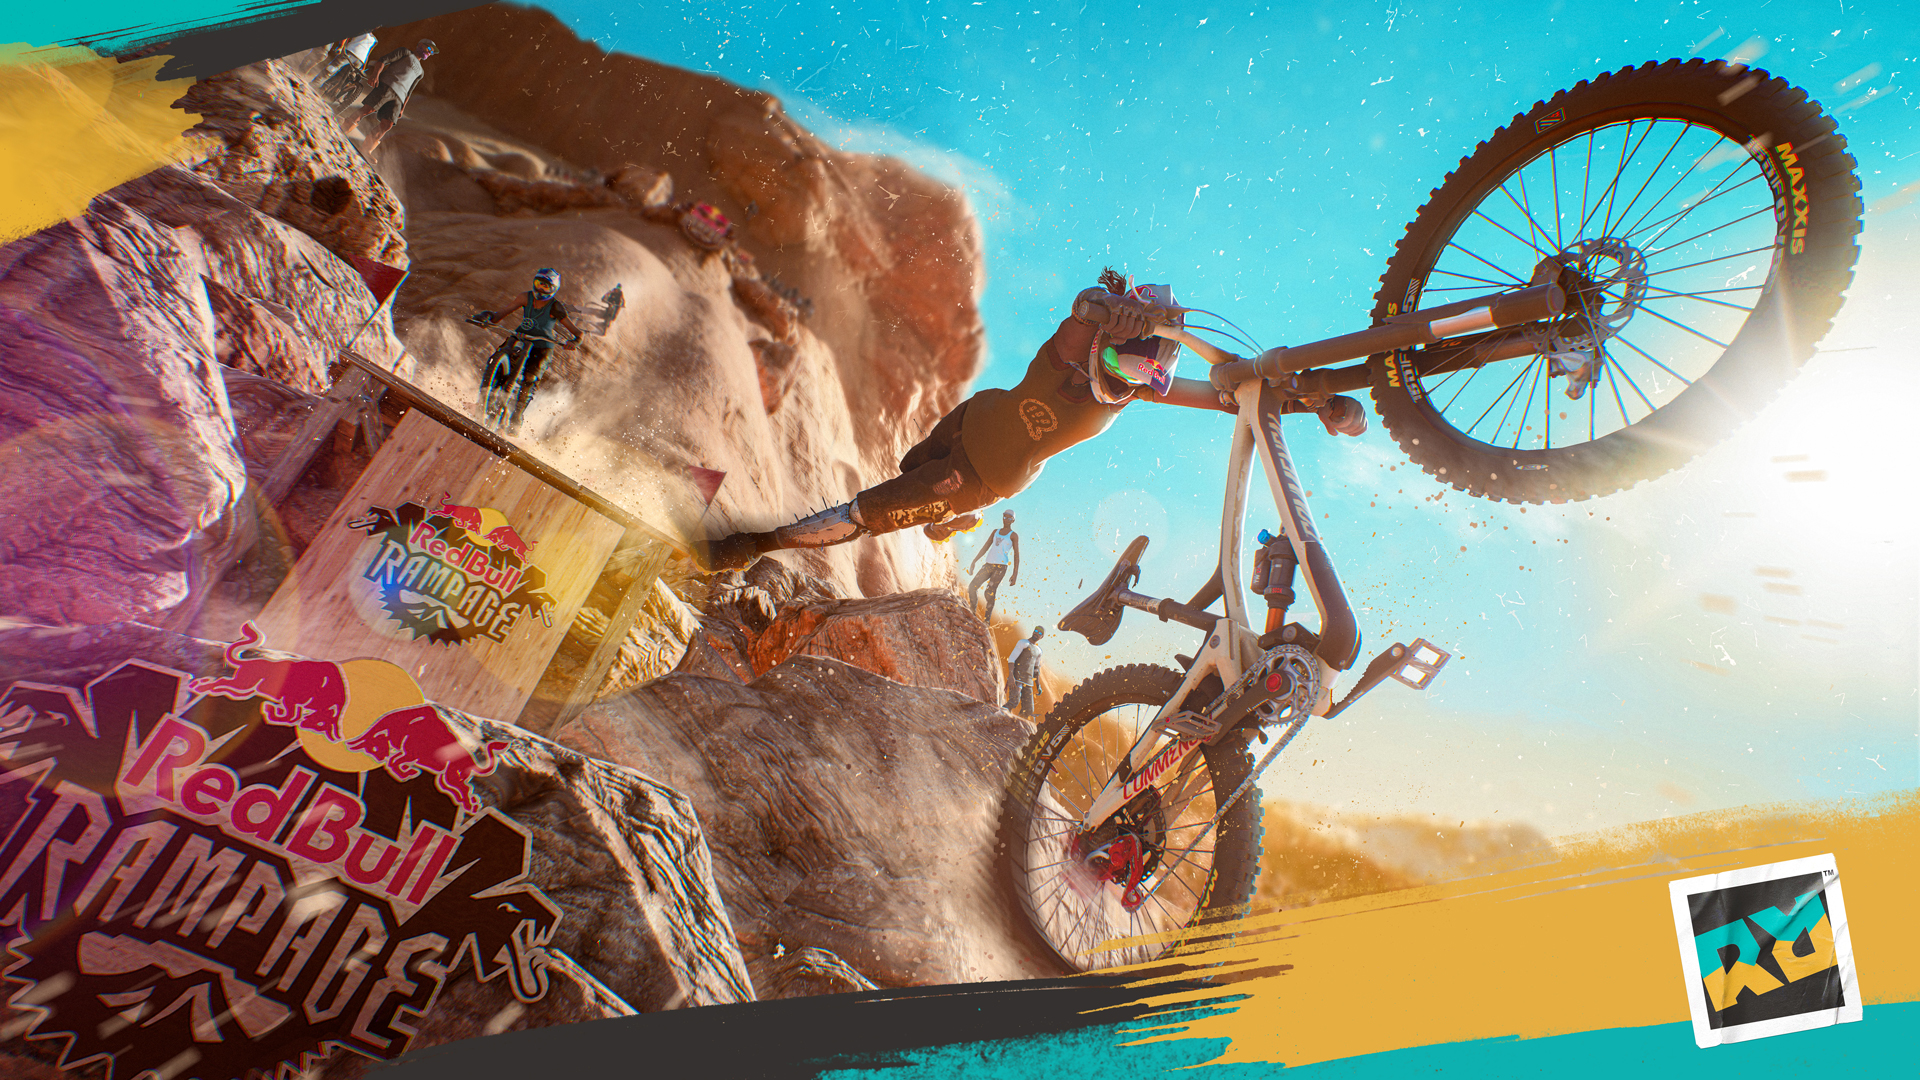 Riders Republic is Forza Horizon for extreme sports, and it's wild fun